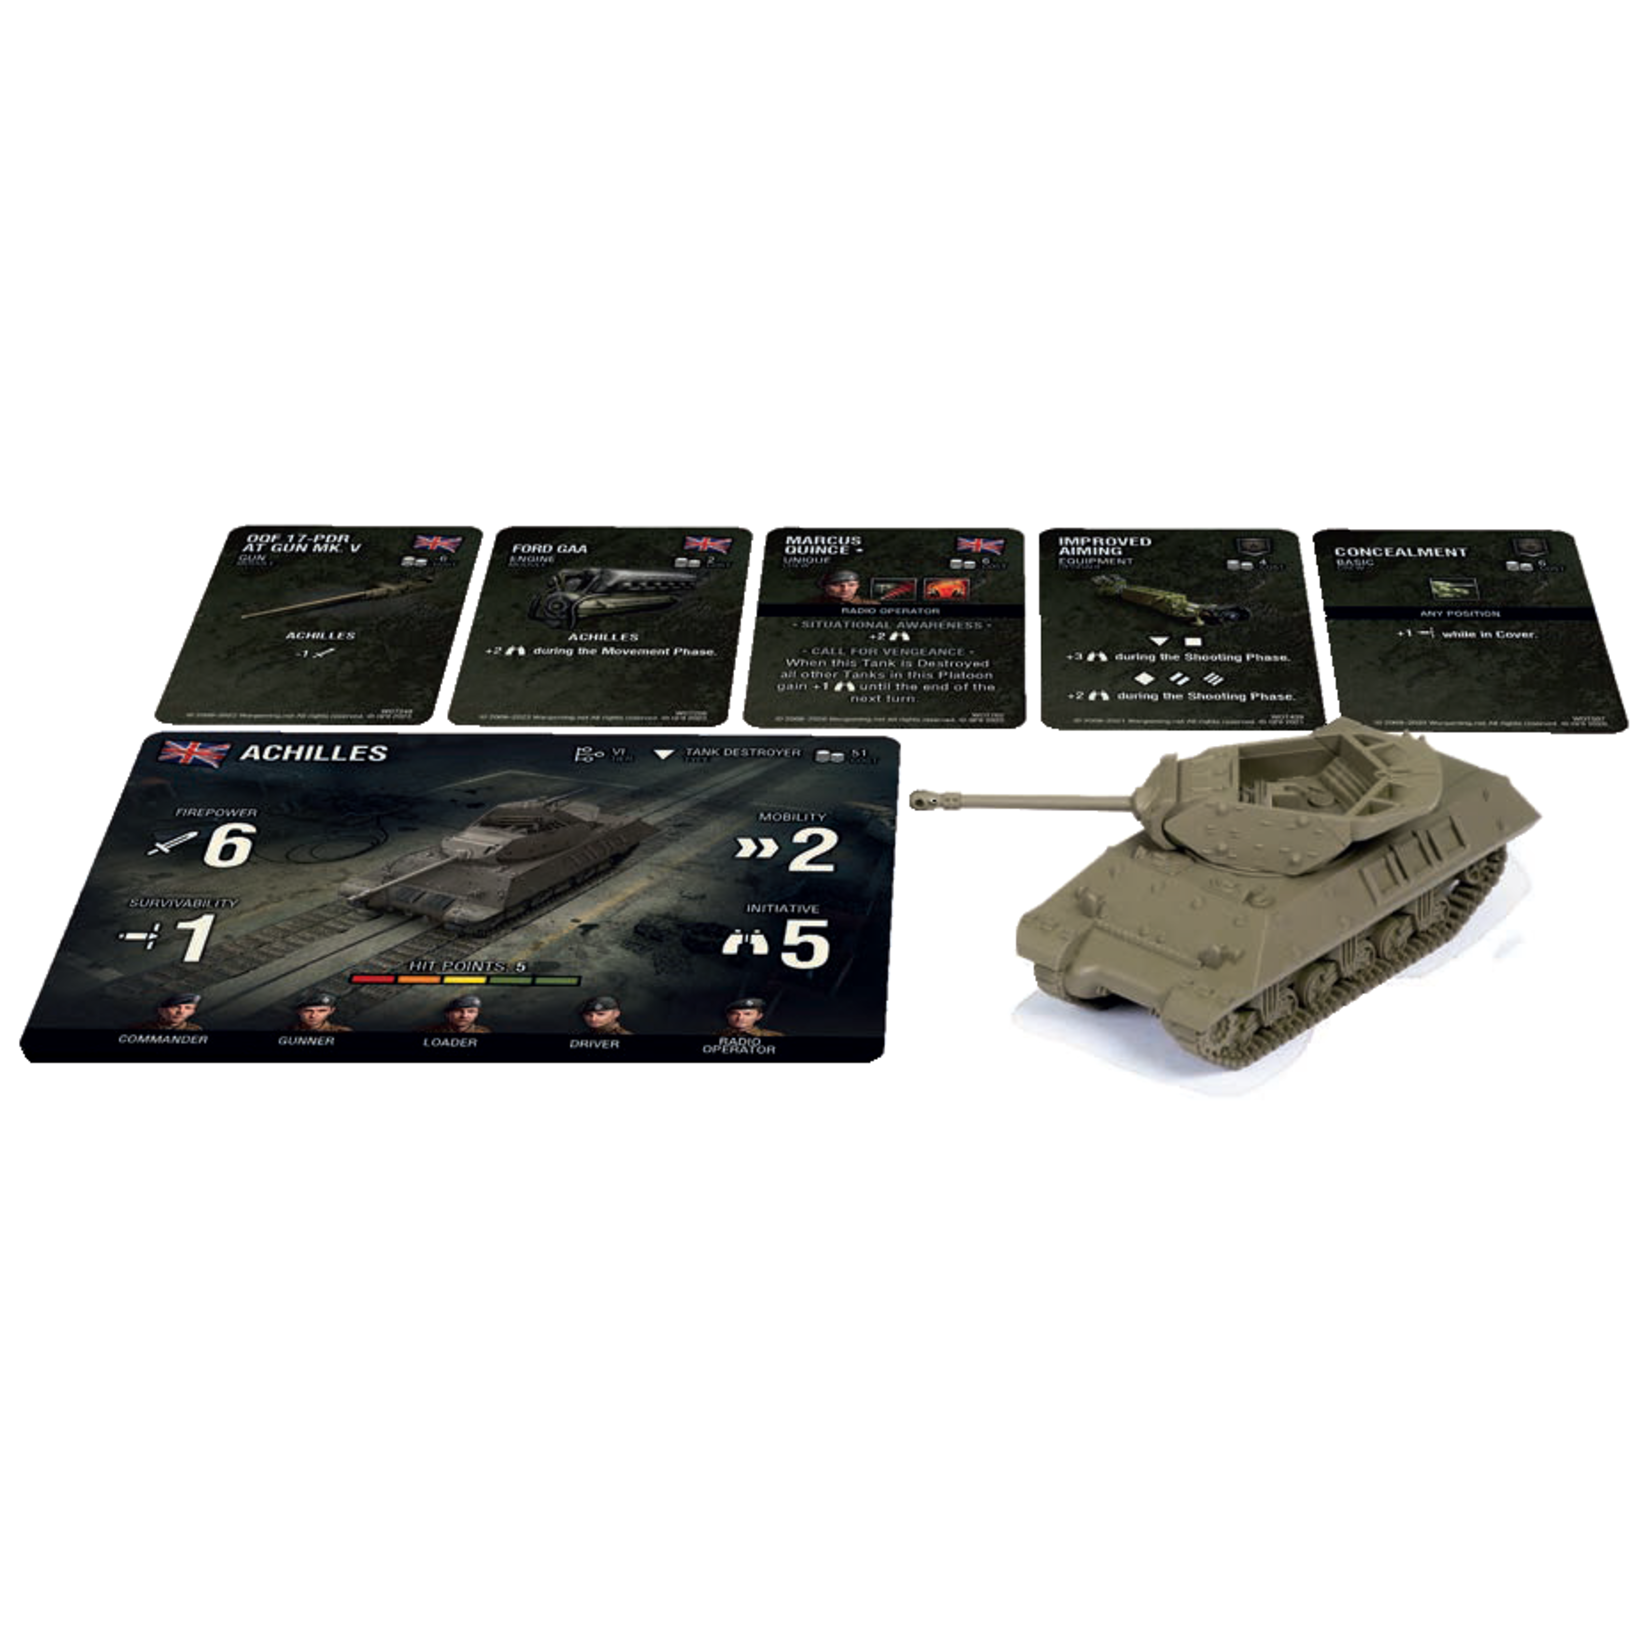 Gale Force 9 World of Tanks Expansion: British Achilles